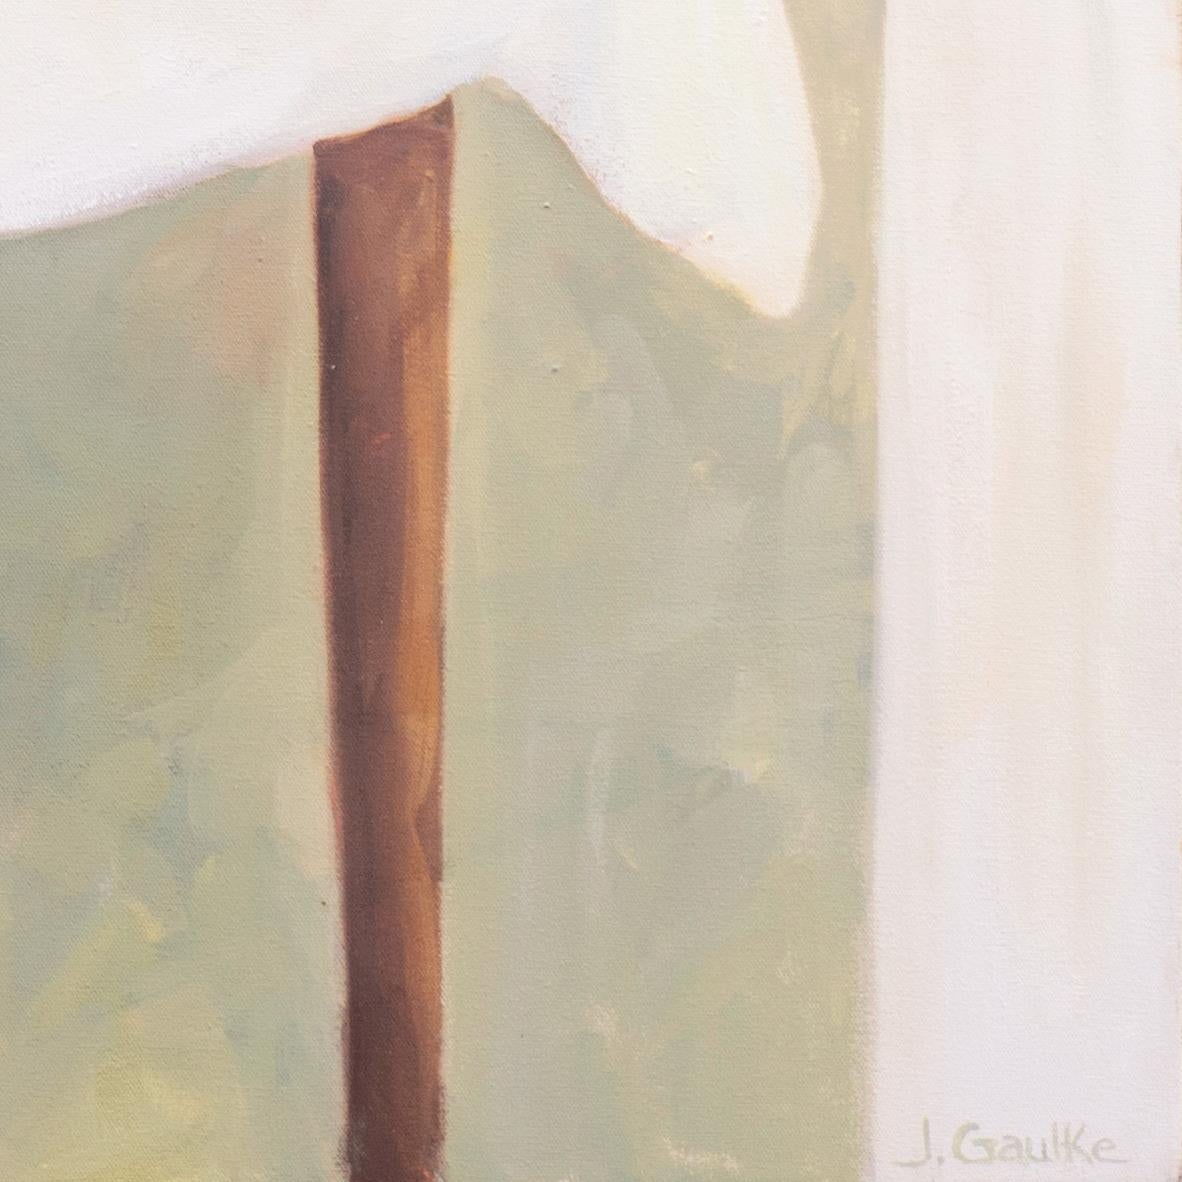 'Interior, Ivory and Jade', France, Atherton, California, Hawaii, Large Oil - Painting by Judith Gaulke